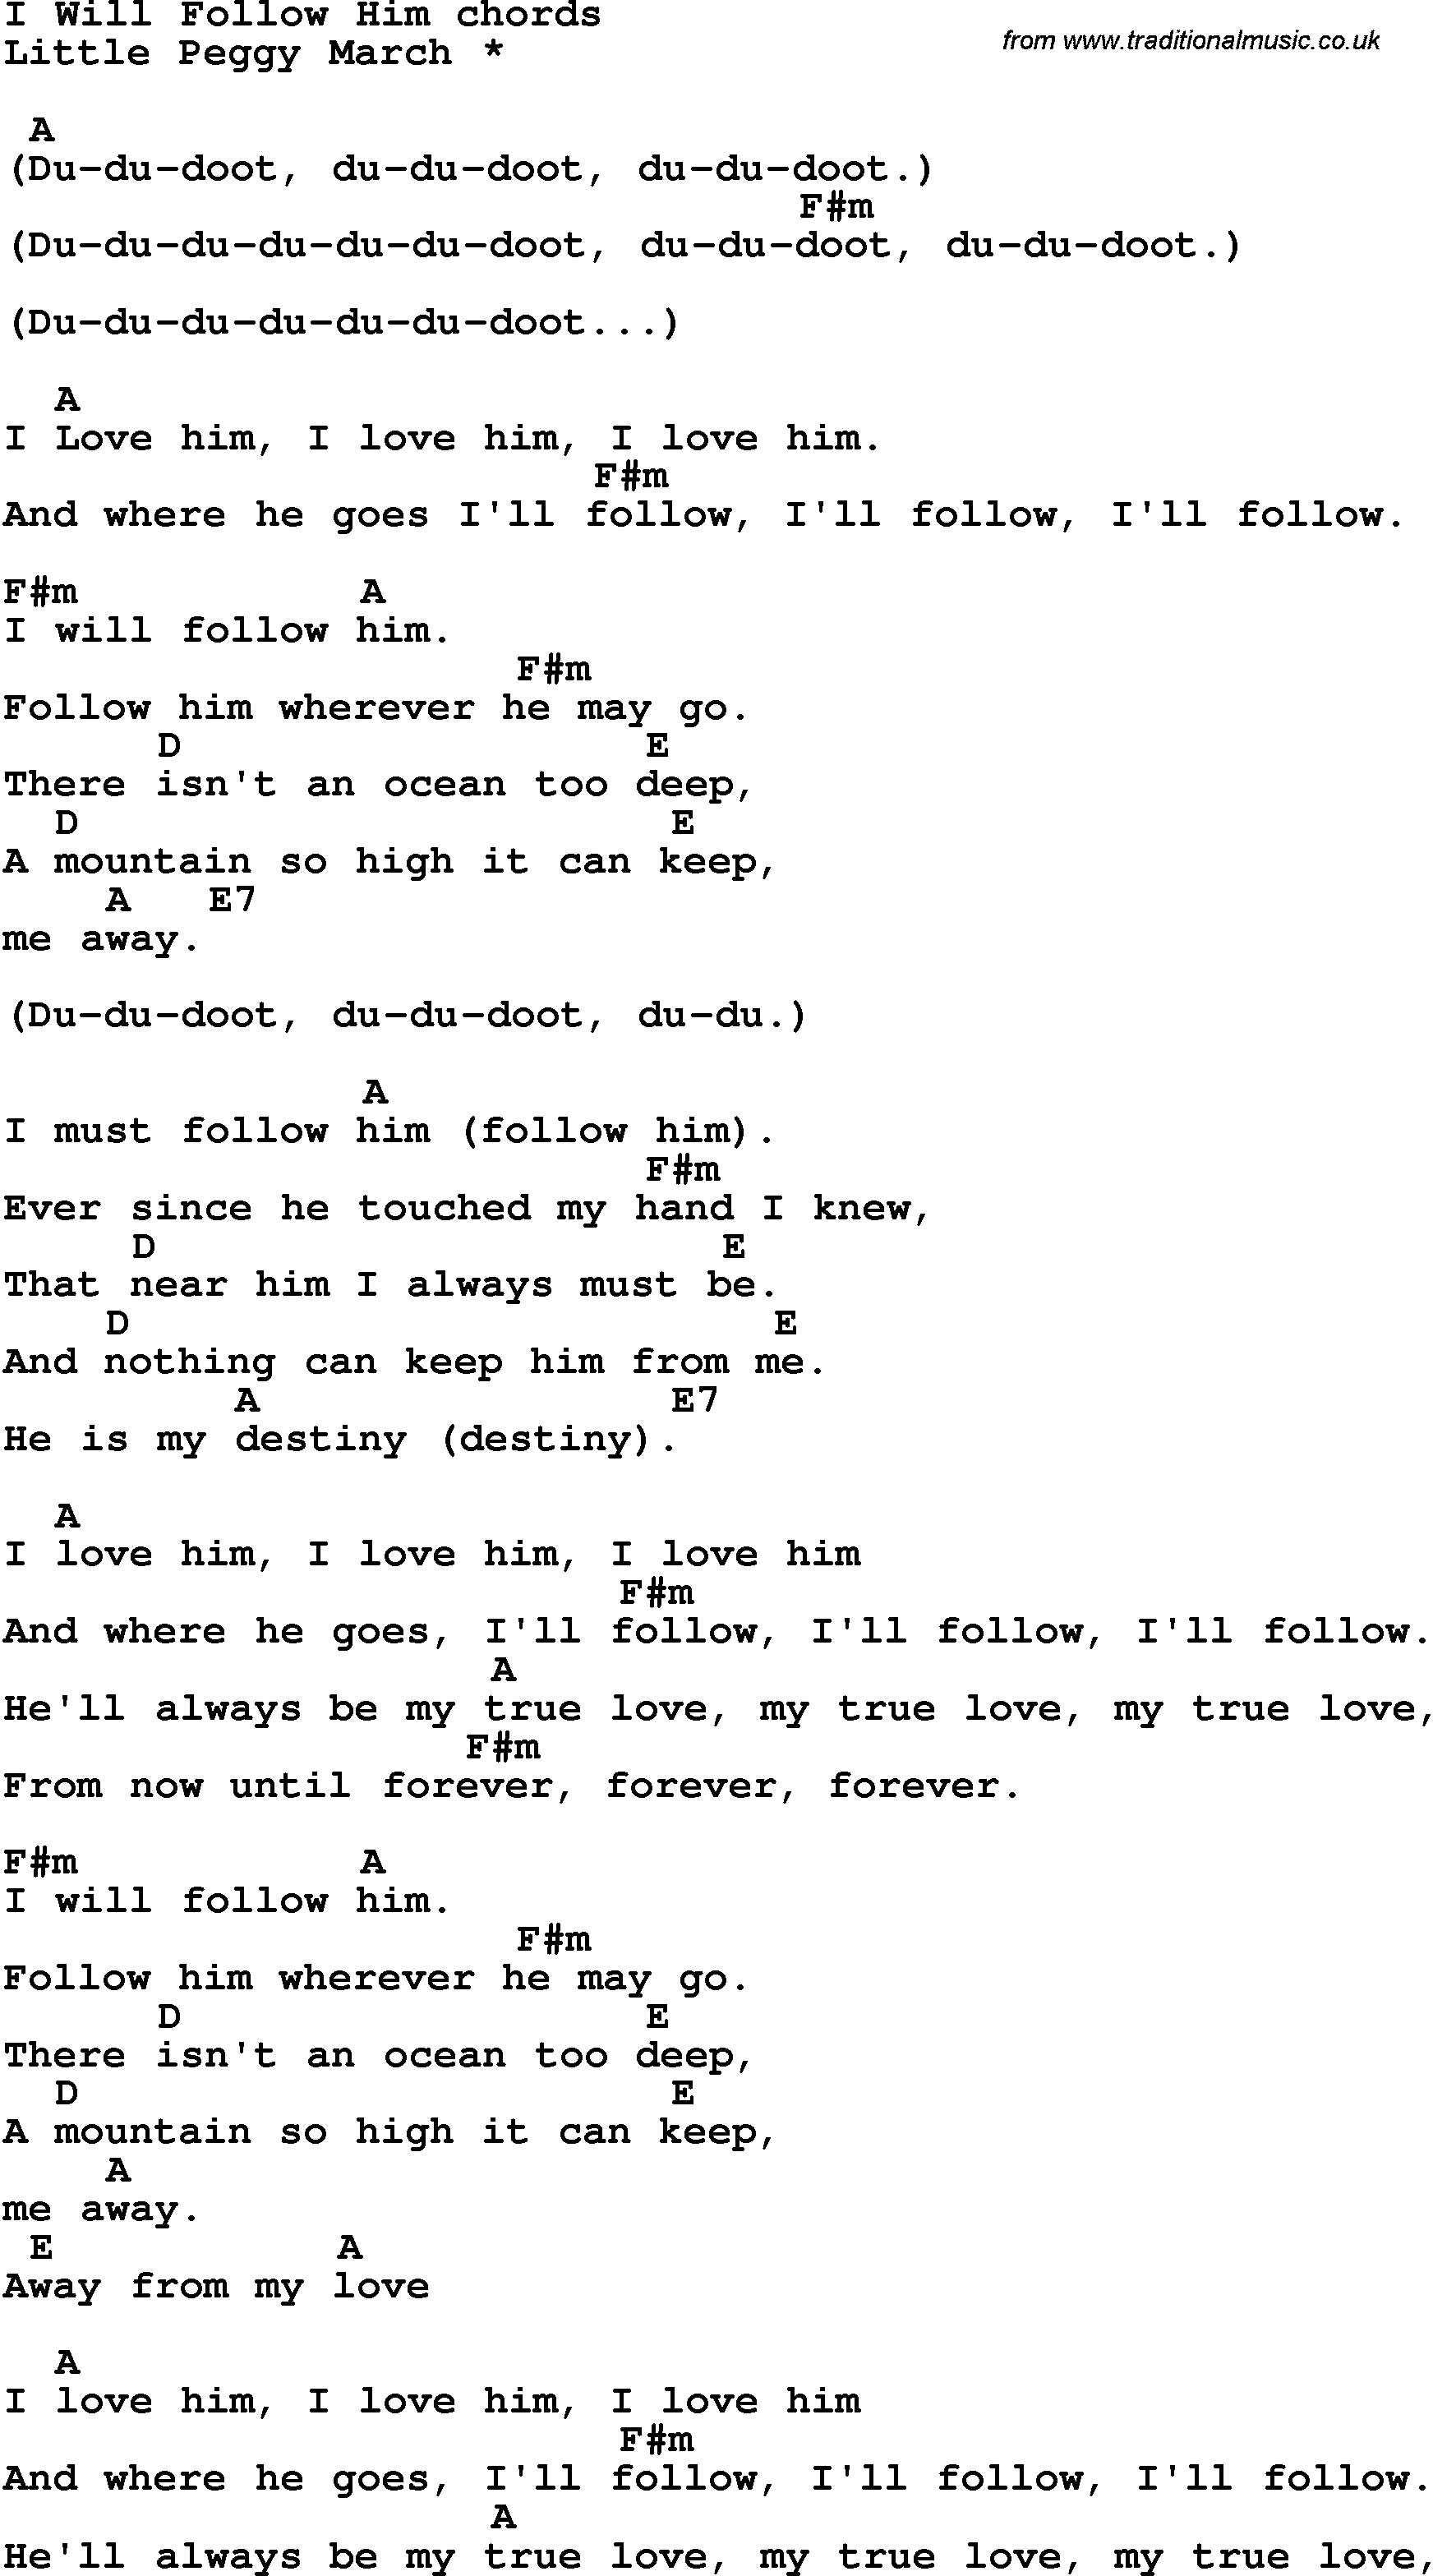 Song Lyrics with guitar chords for I Will Follow Him